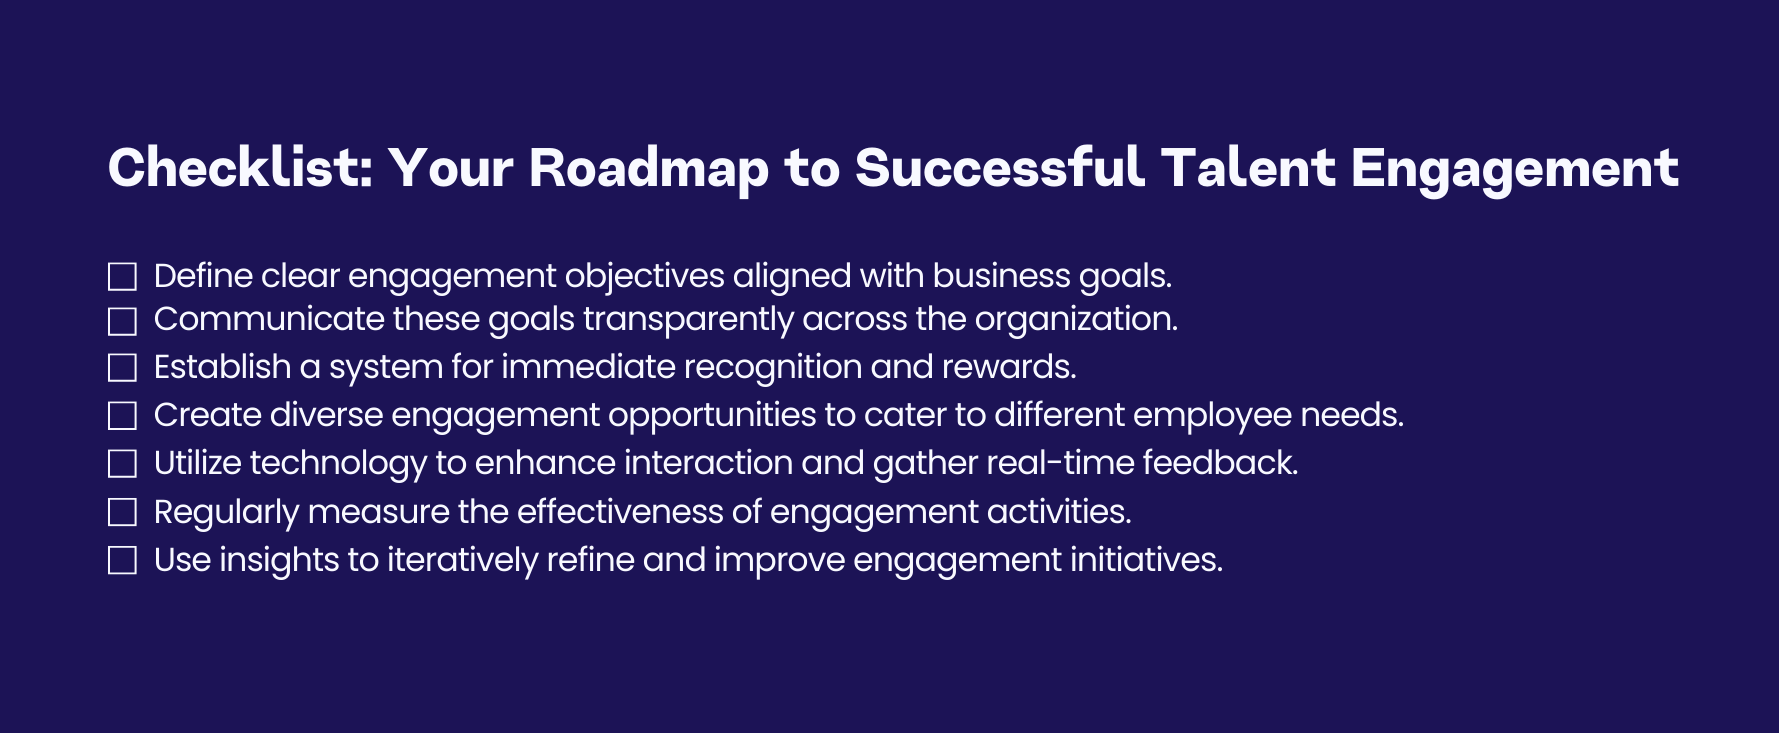 Your Roadmap to Successful Talent Engagement